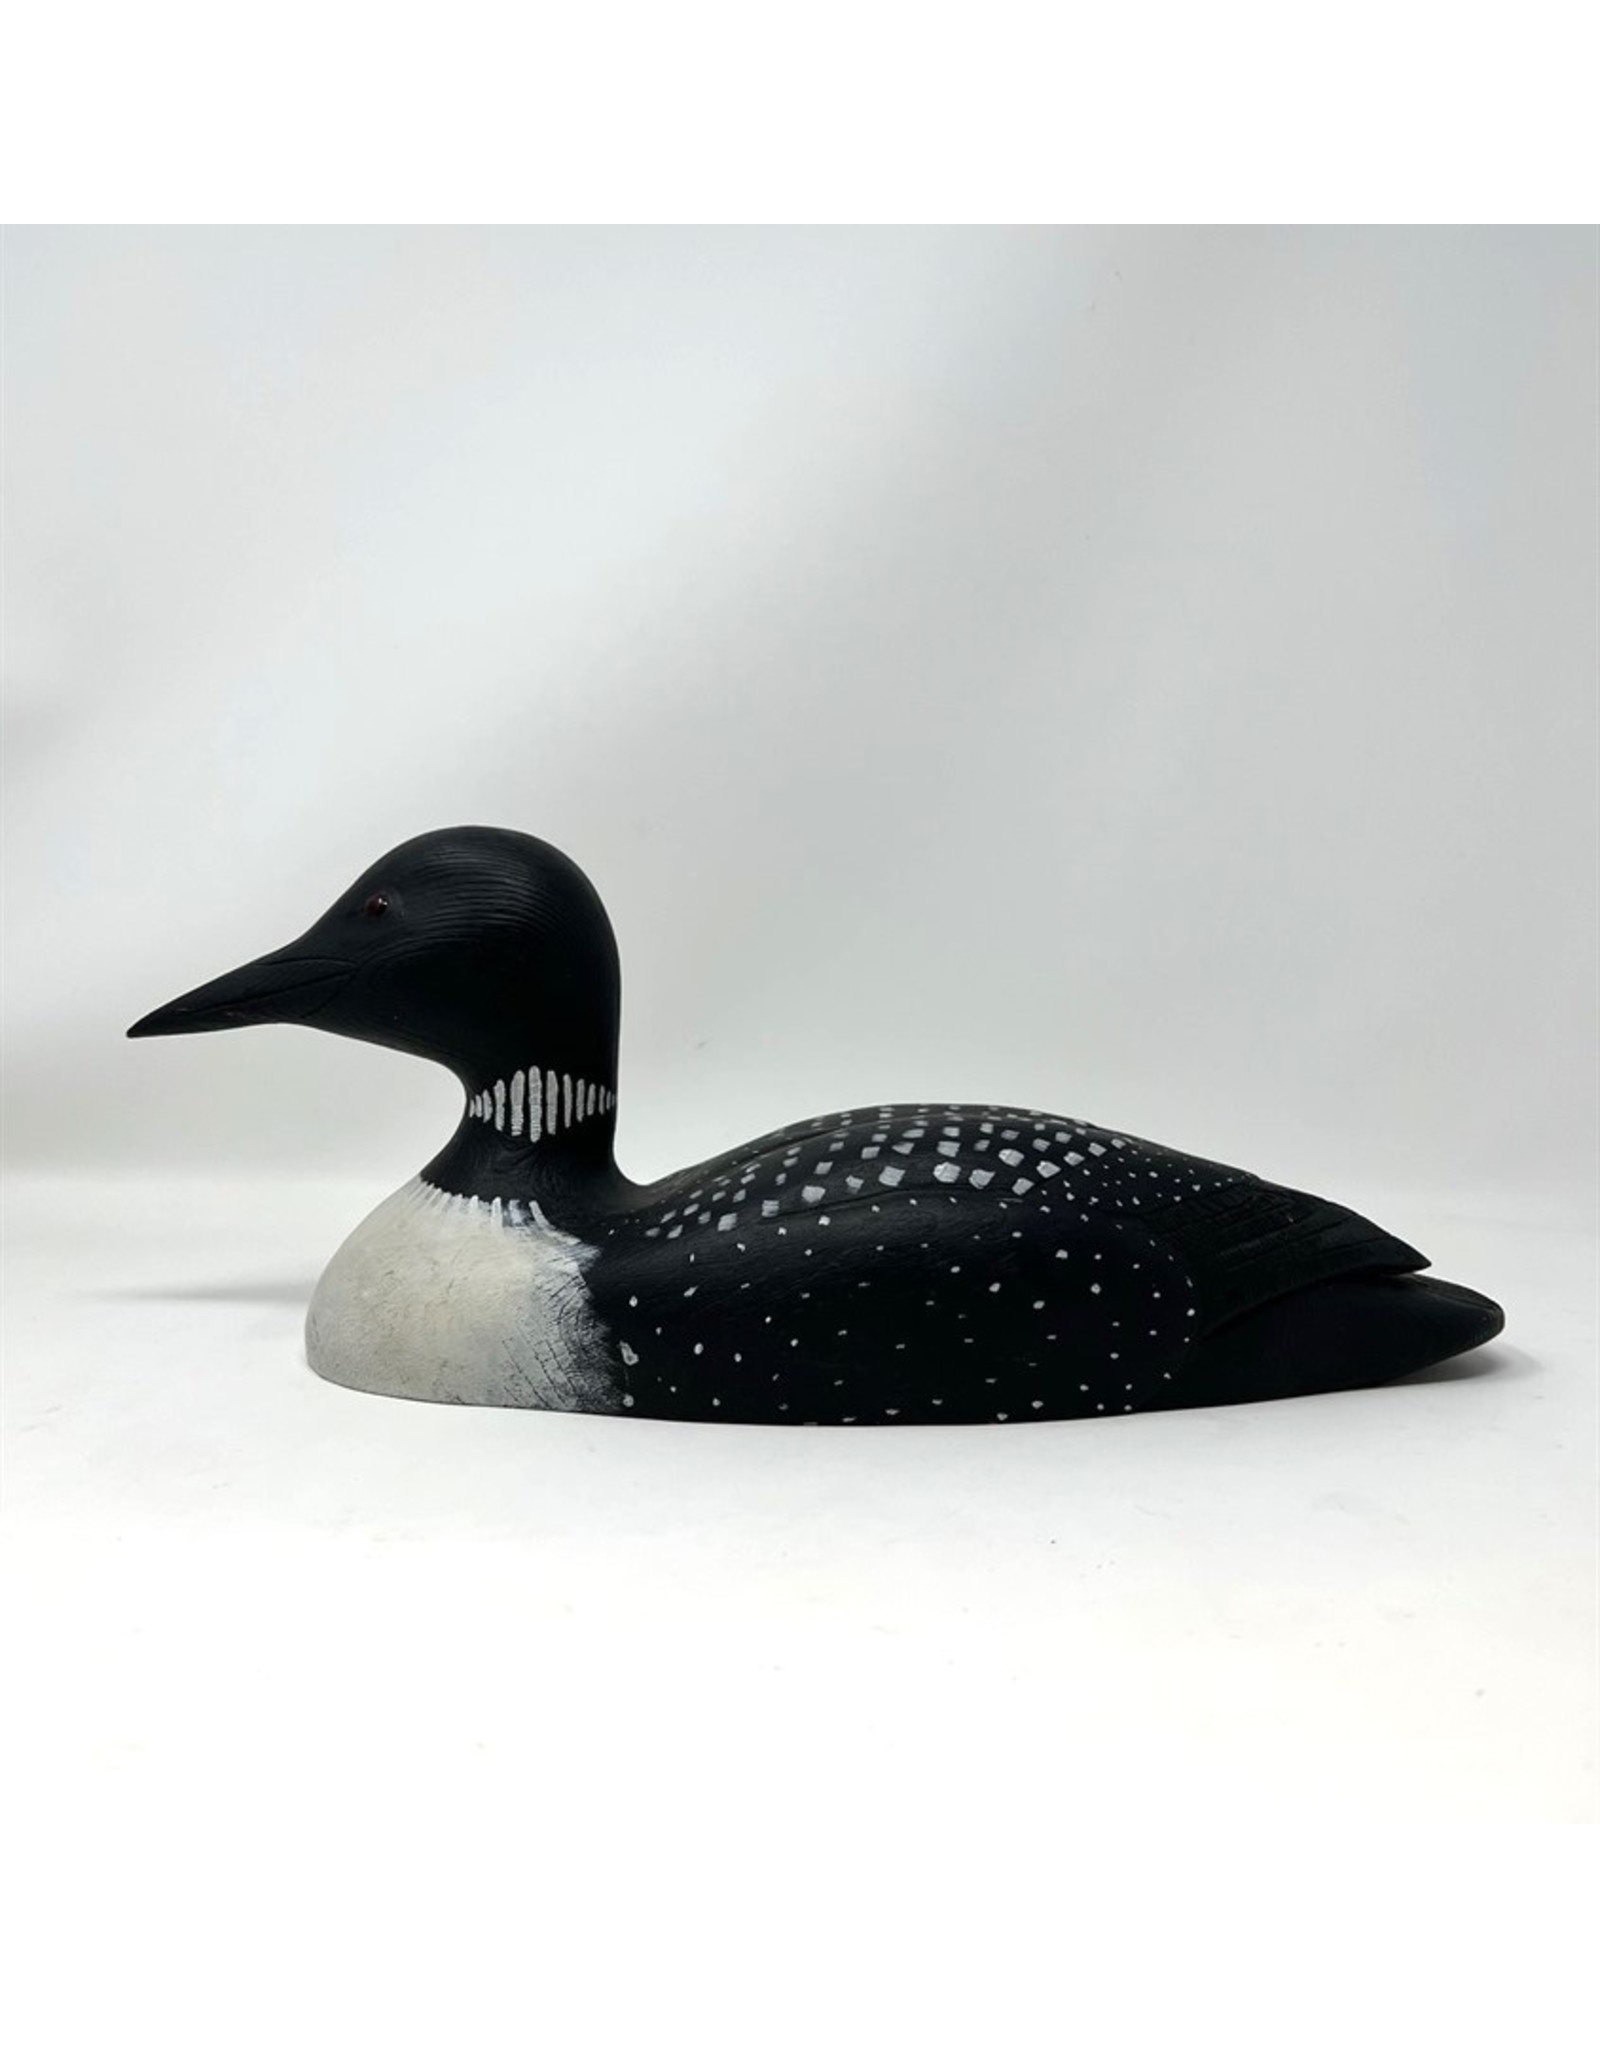 Duck decoy - carved wooden loon, signed CM Alexander, Perth Ontario, 1987